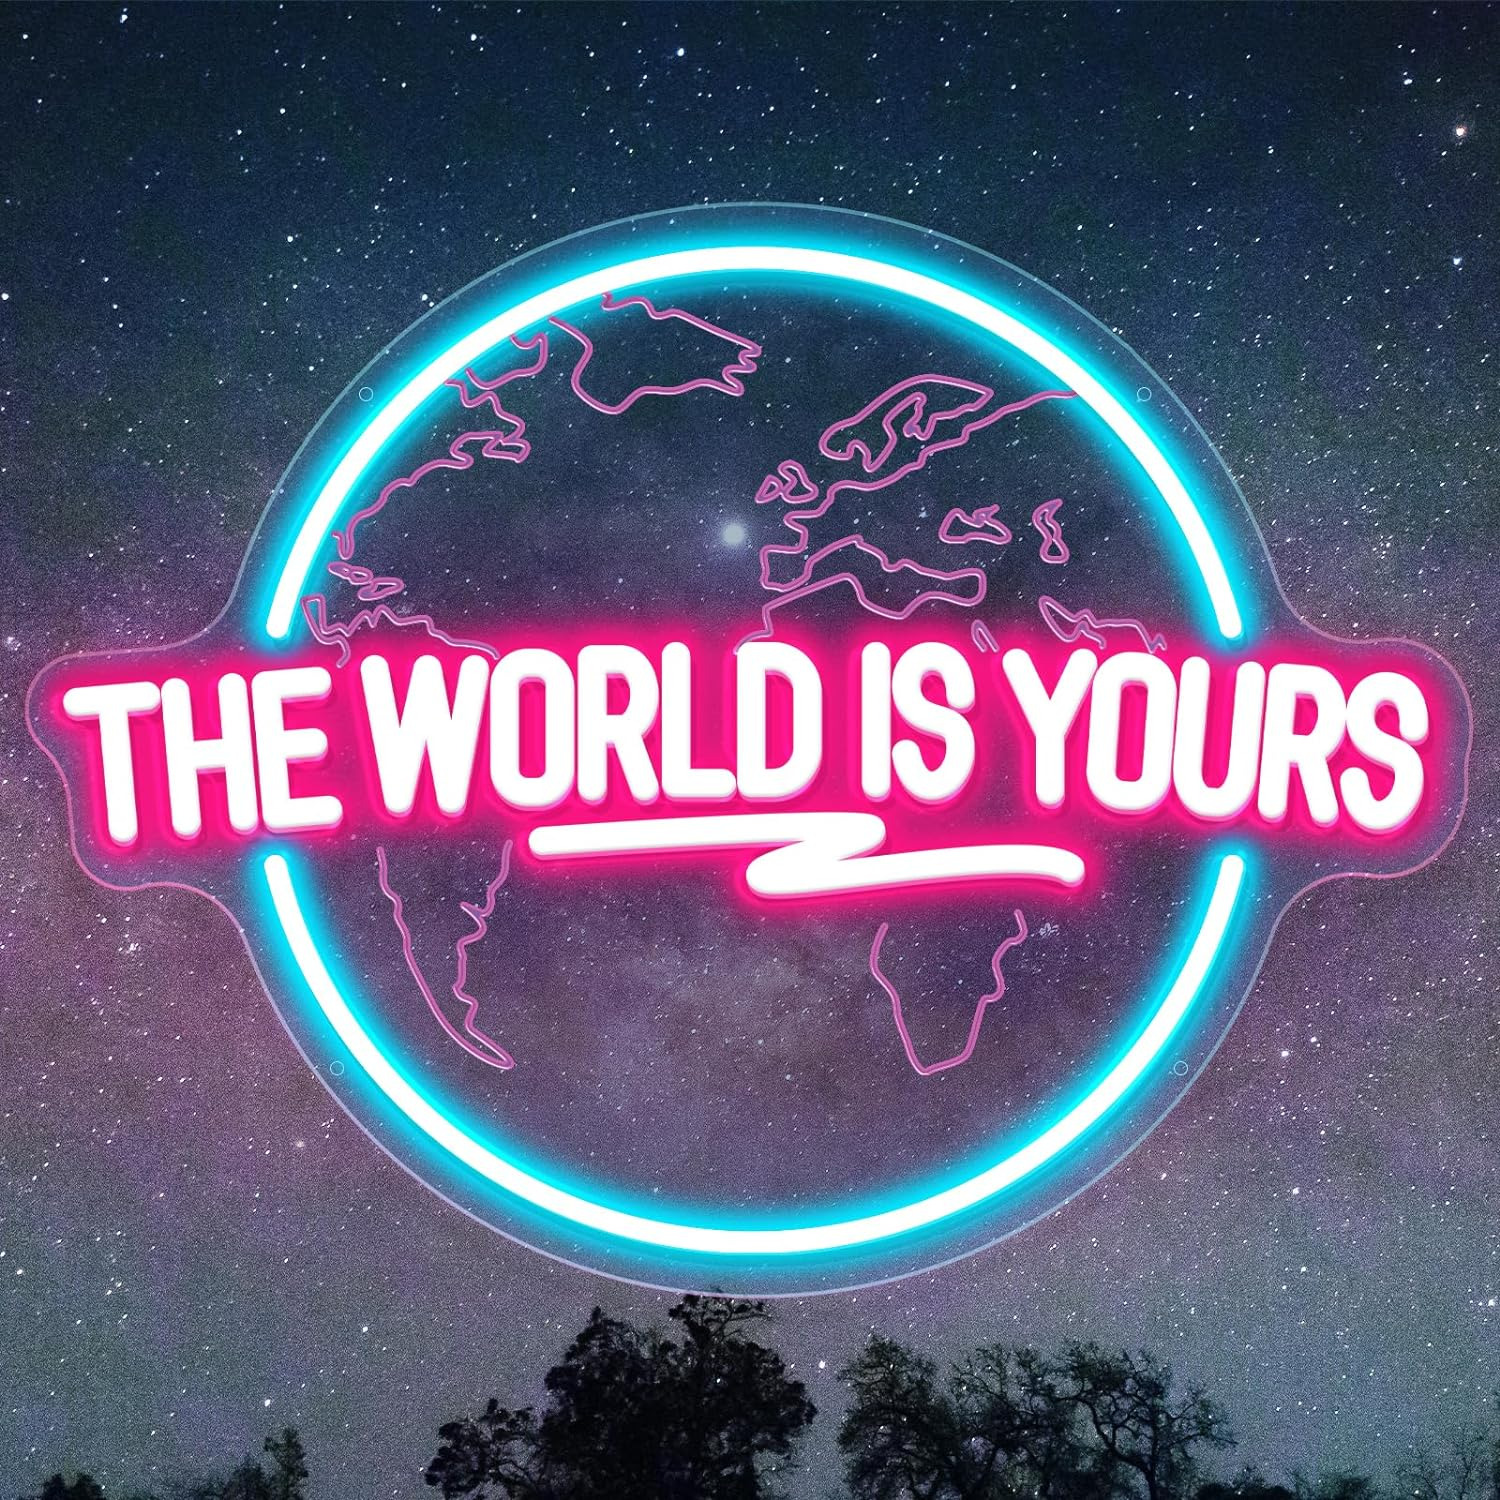 The World Is Yours Neon Sign, Carved Planet The World Is Yours LED Neon Light...